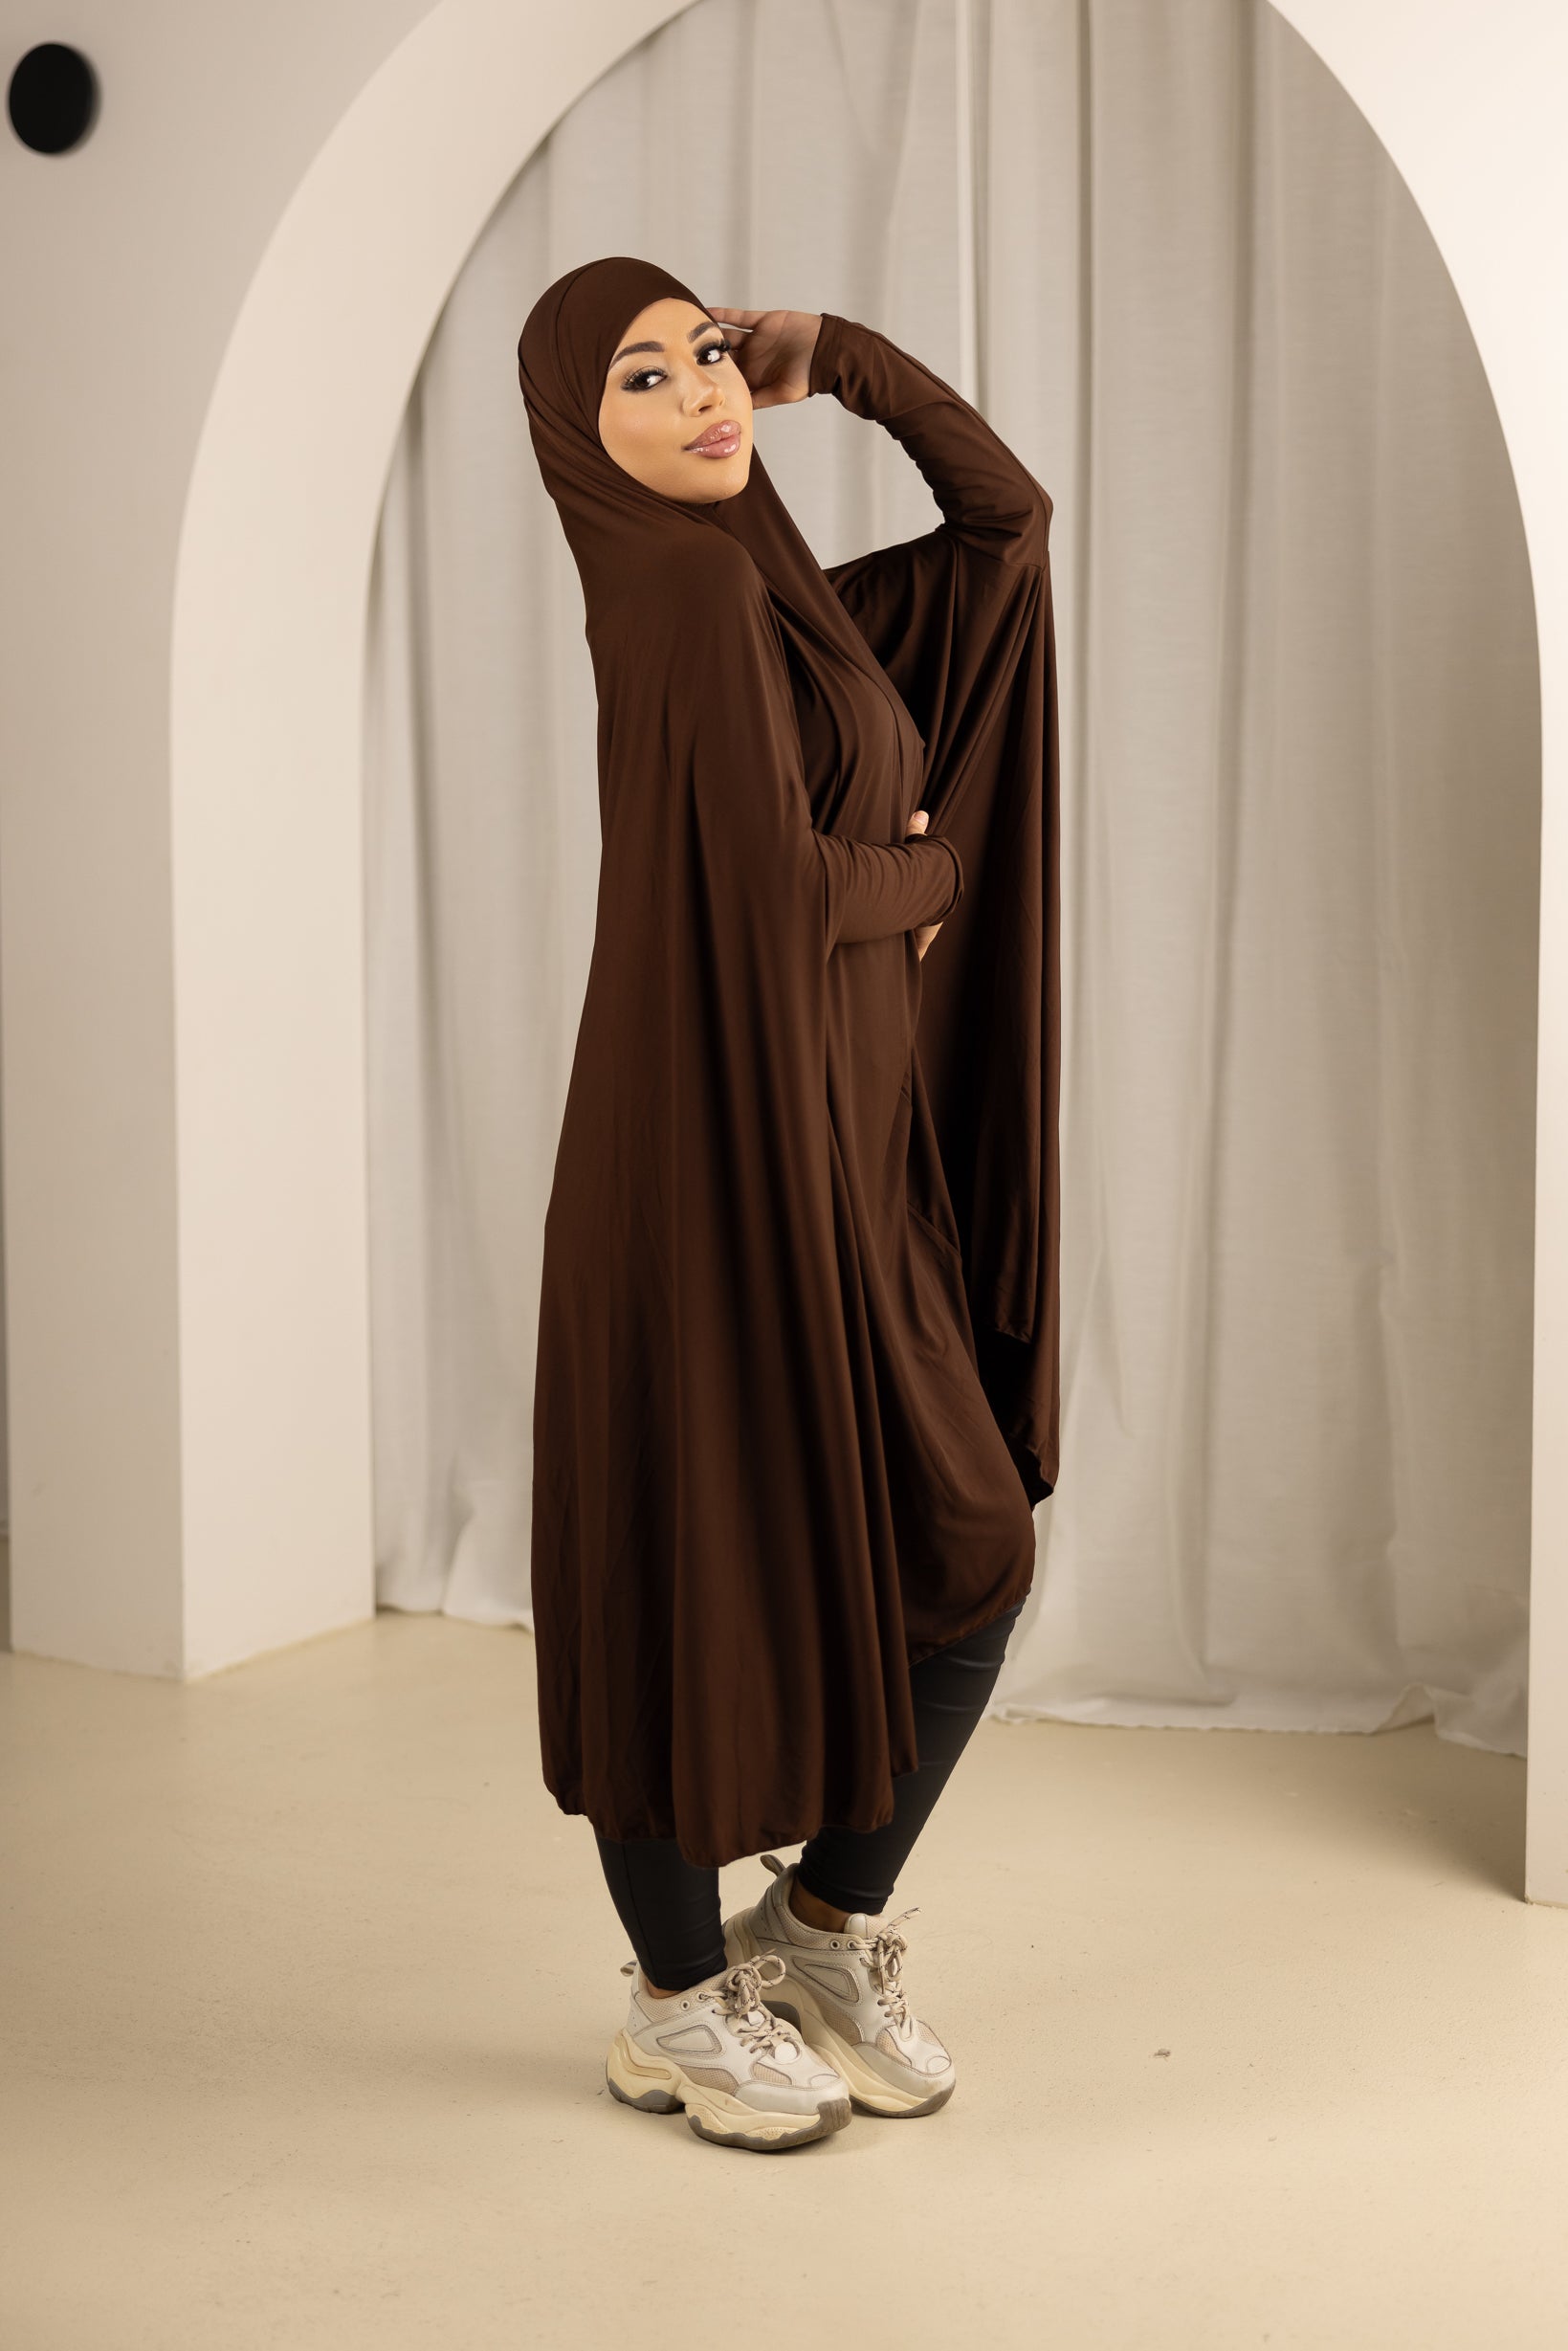 Sleeve Jilbab with Cap - Shades of Brown